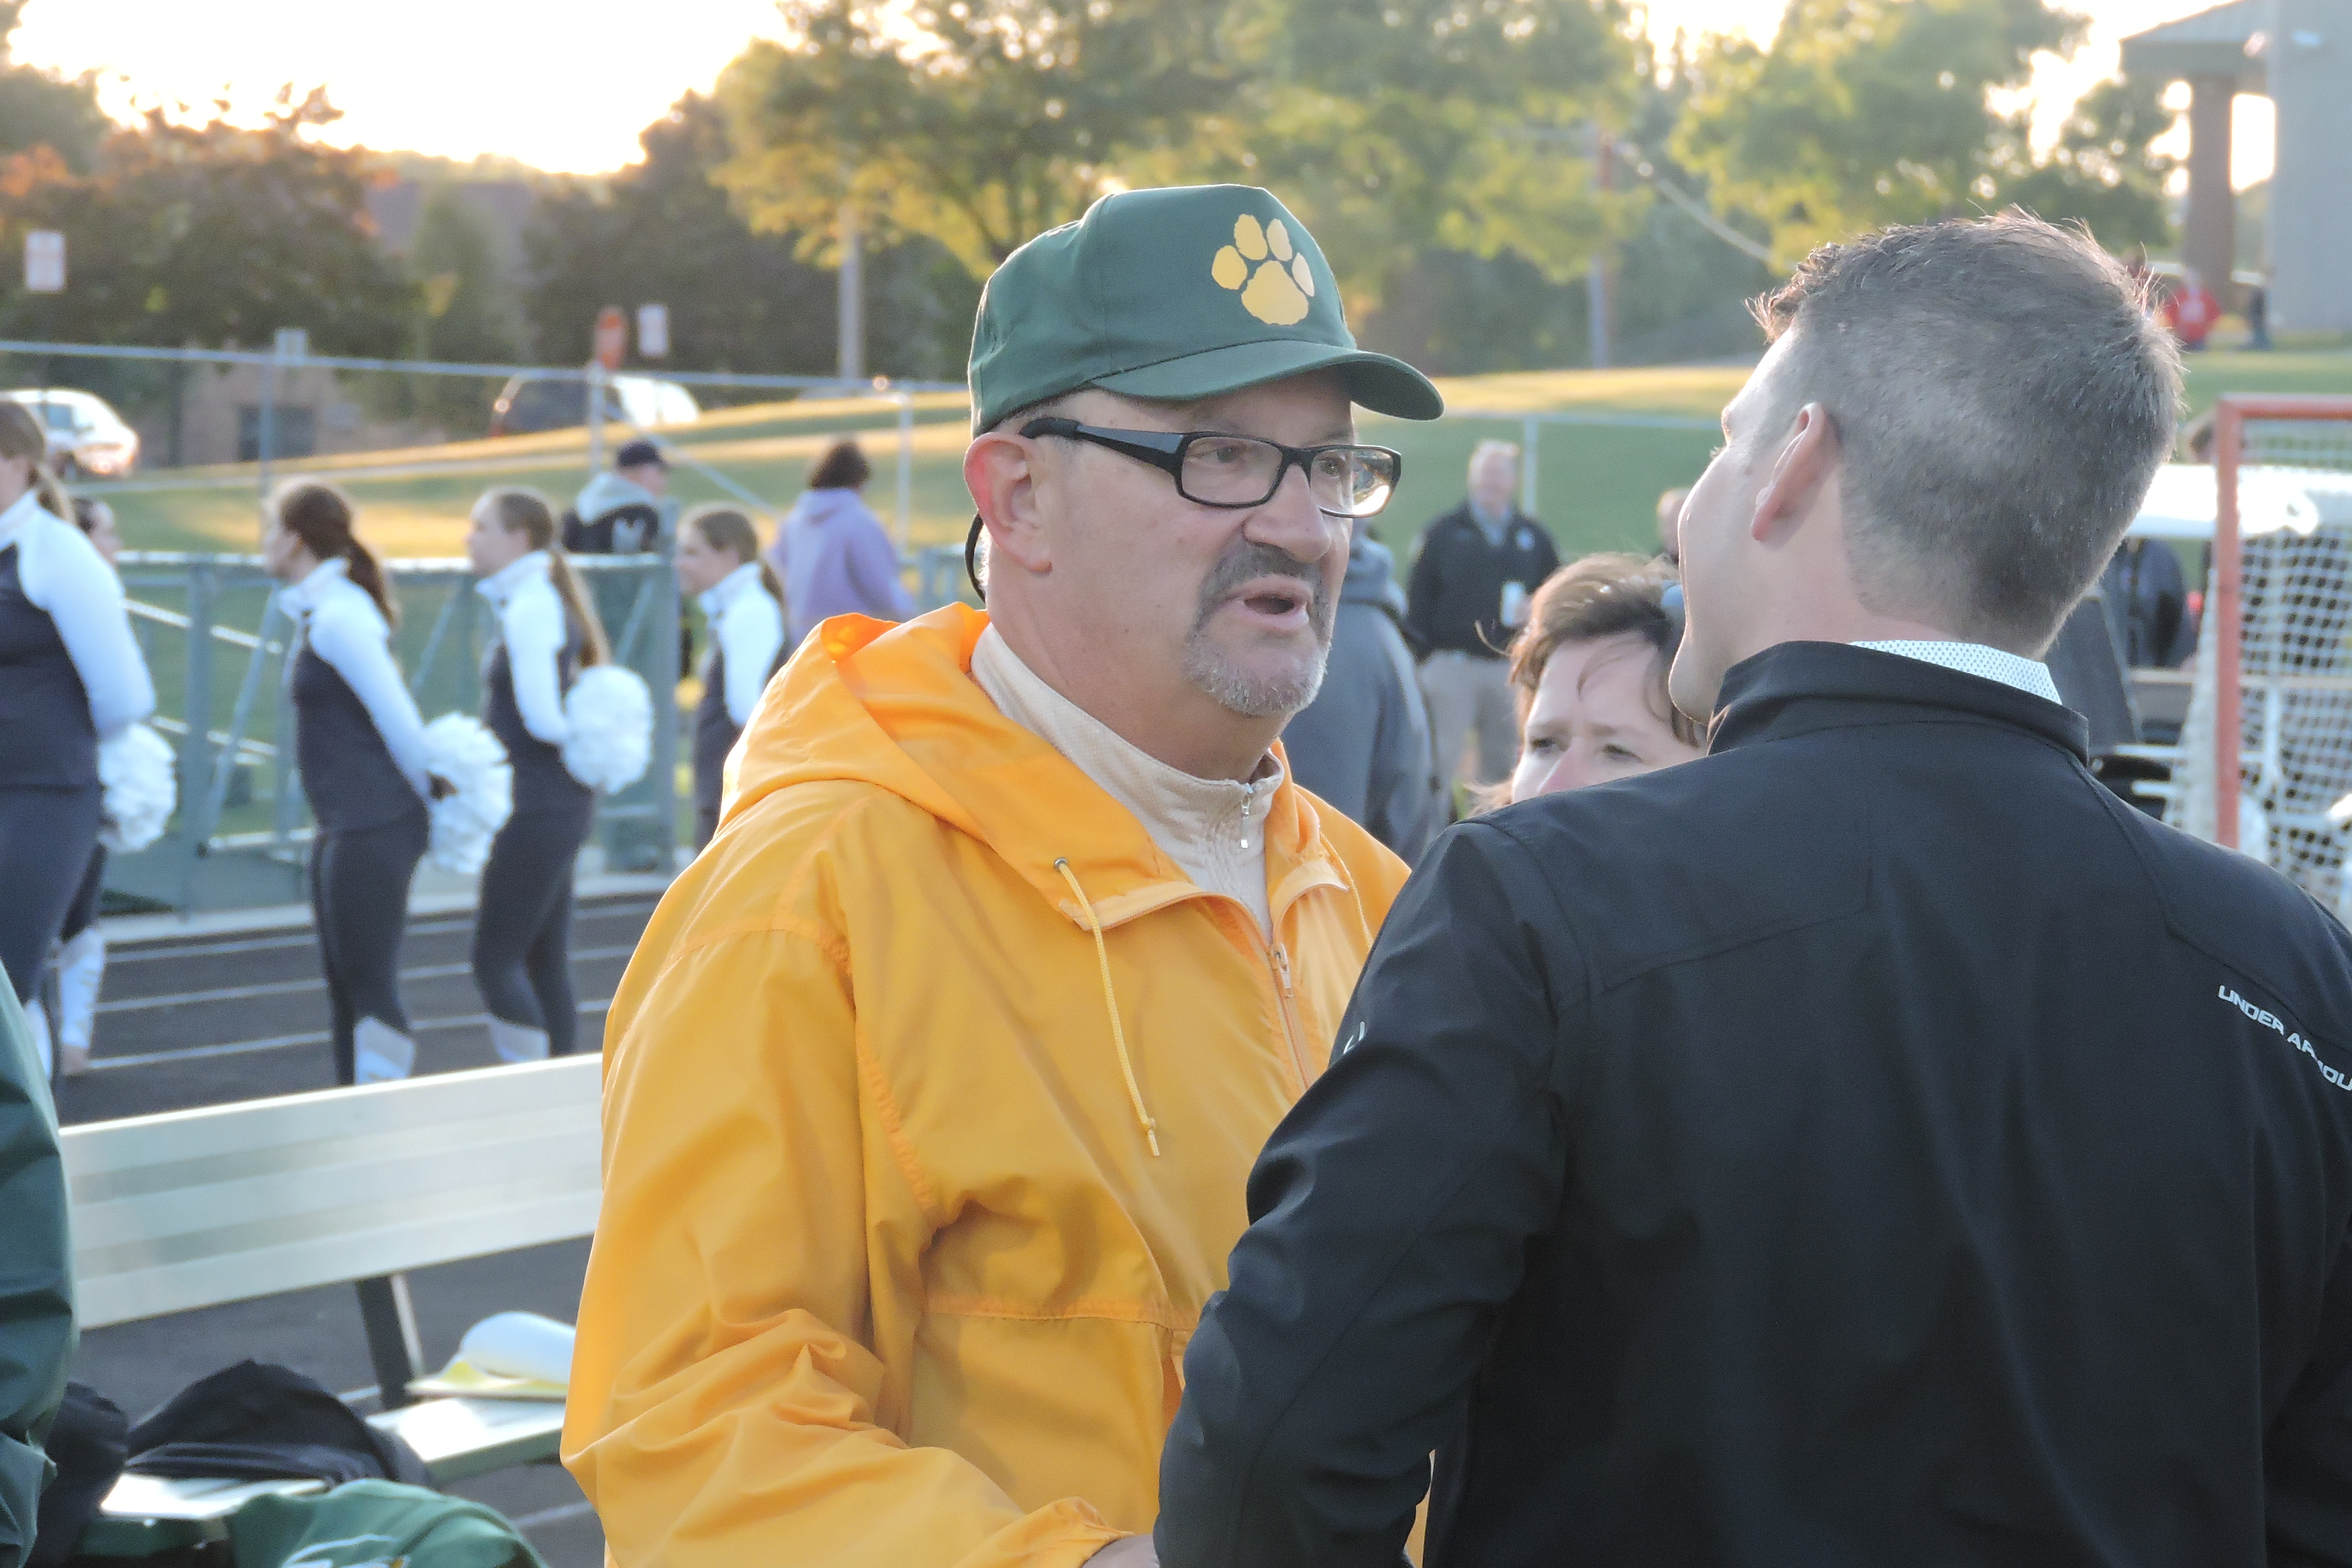 “Coach G honored in heart-felt, emotional ceremony prior to Jaguar football game”